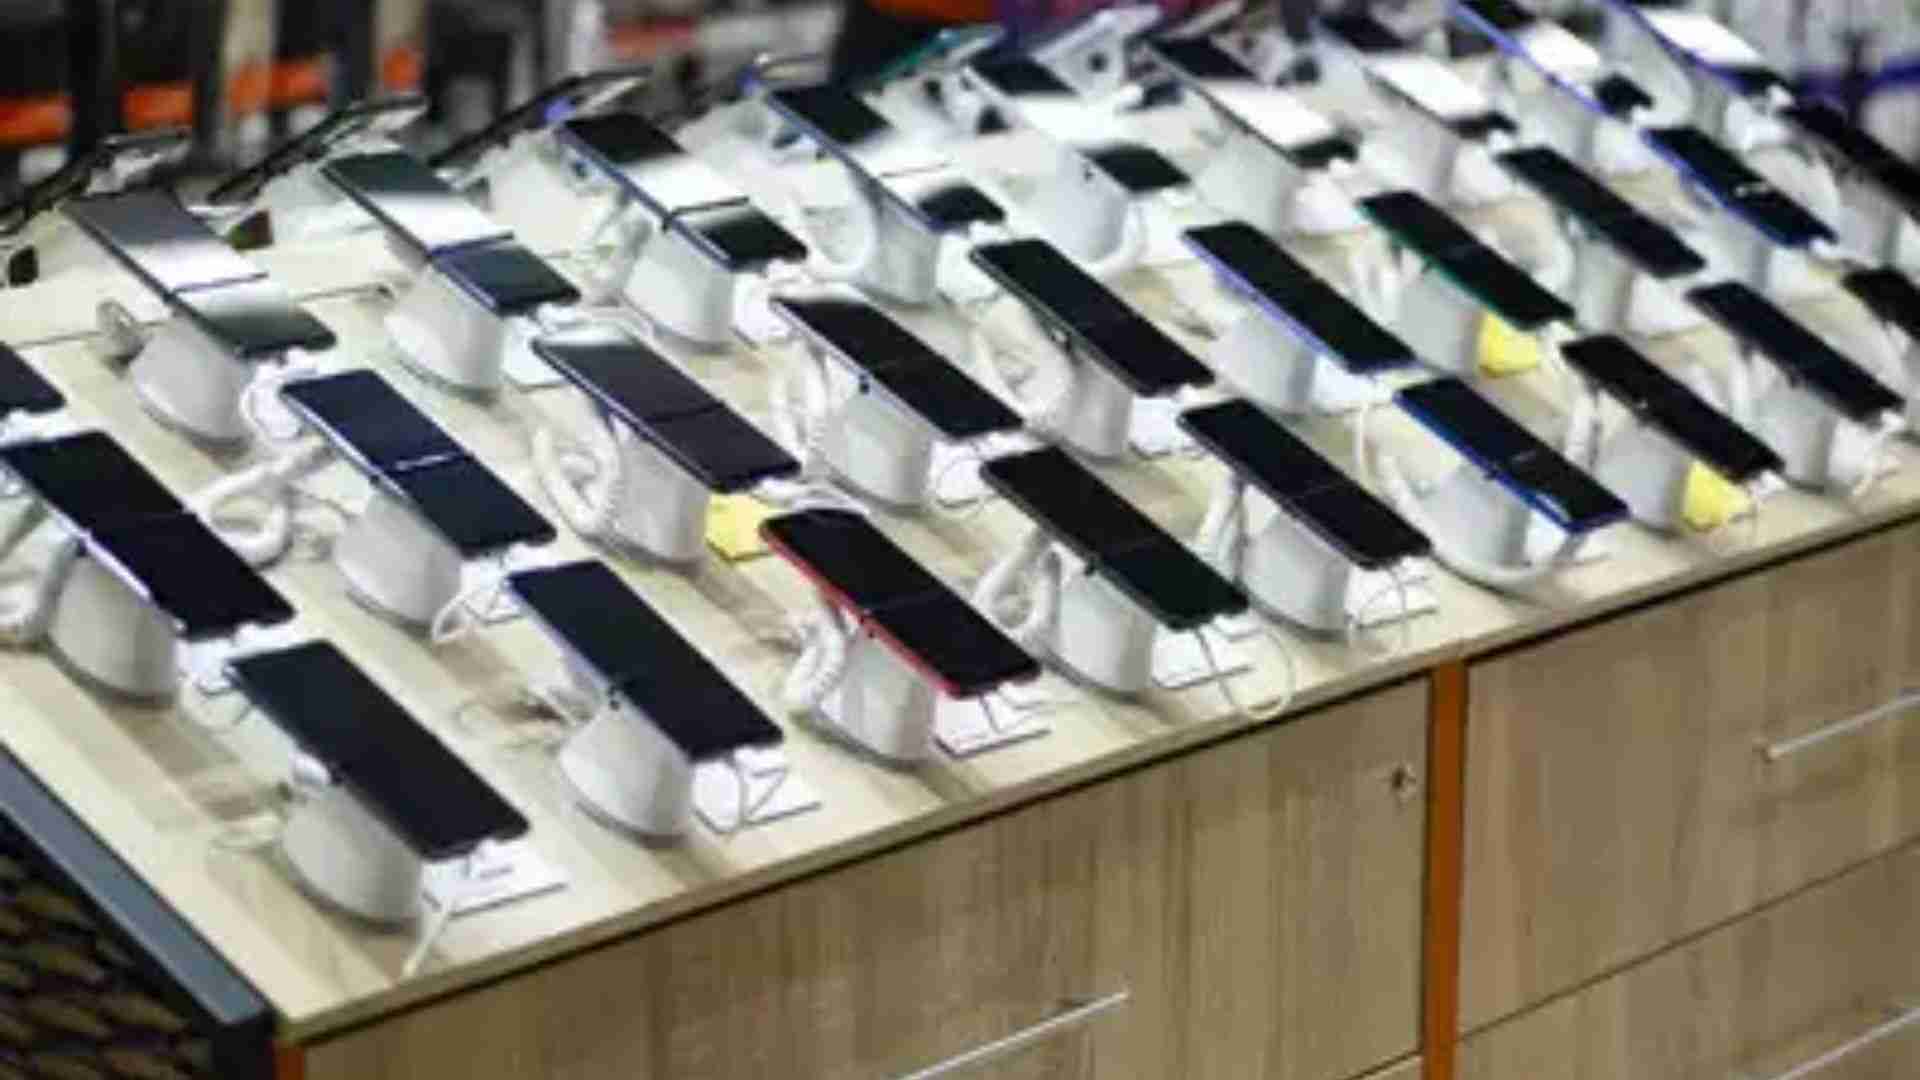 This Company Plans To Export Made In India Phones To Europe & US